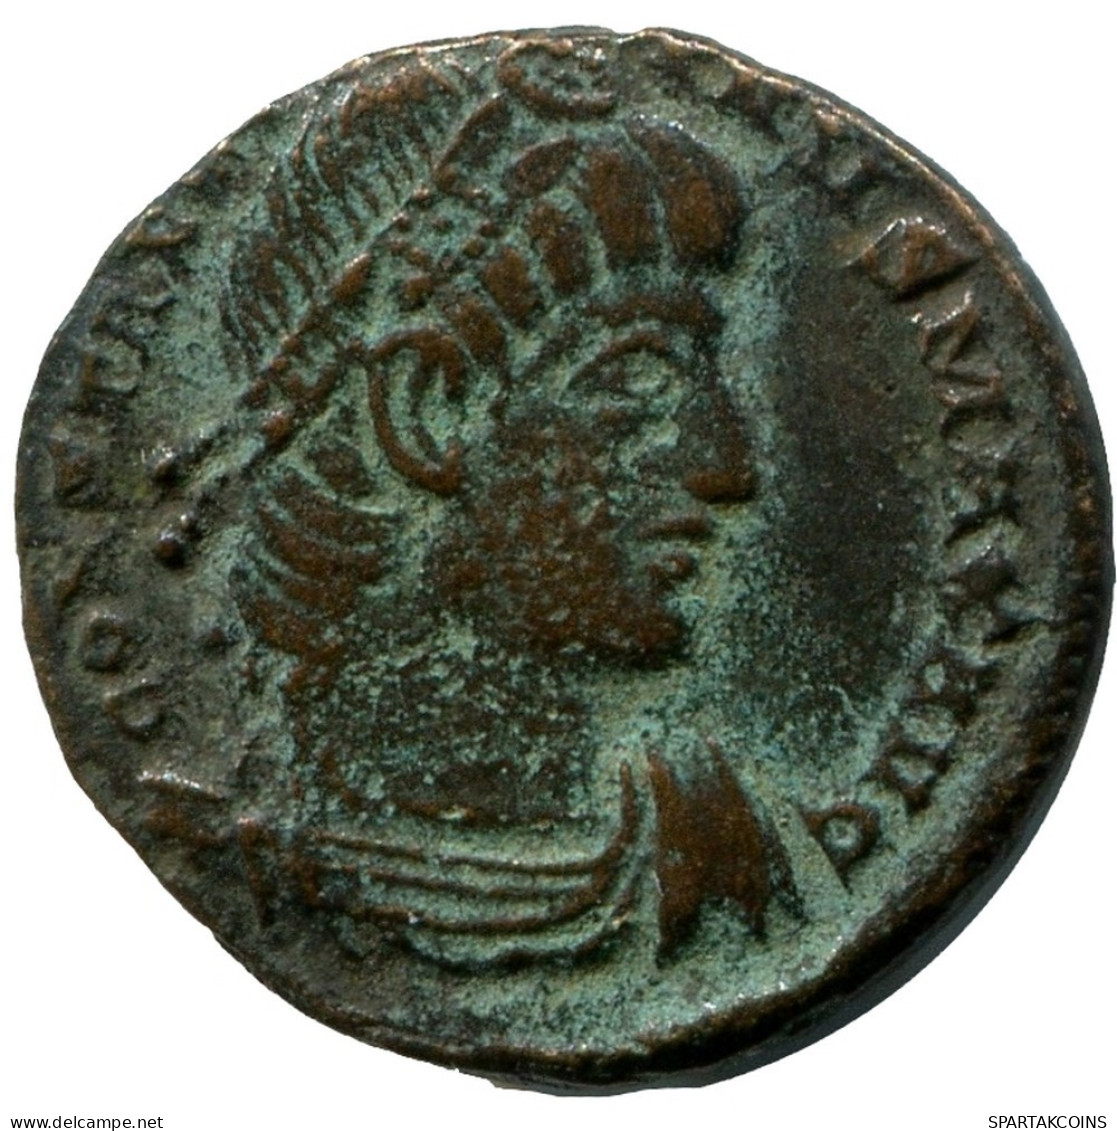 CONSTANTINE I MINTED IN CONSTANTINOPLE FOUND IN IHNASYAH HOARD #ANC10730.14.D.A - L'Empire Chrétien (307 à 363)